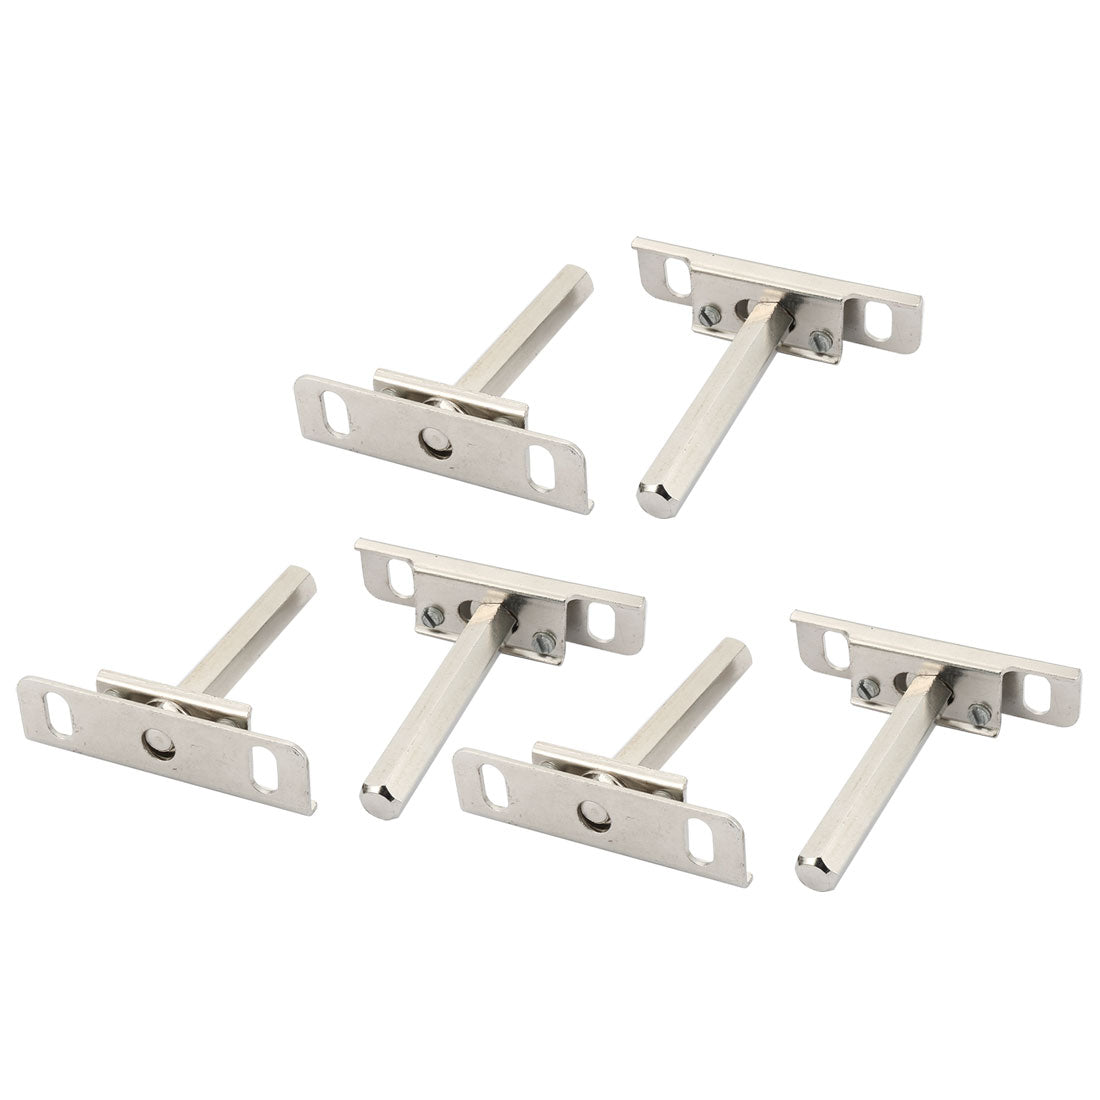 uxcell Uxcell 3" Length Cold Rolled Steel Nickel Plated Invisible Floating Shelf Bracket 6pcs